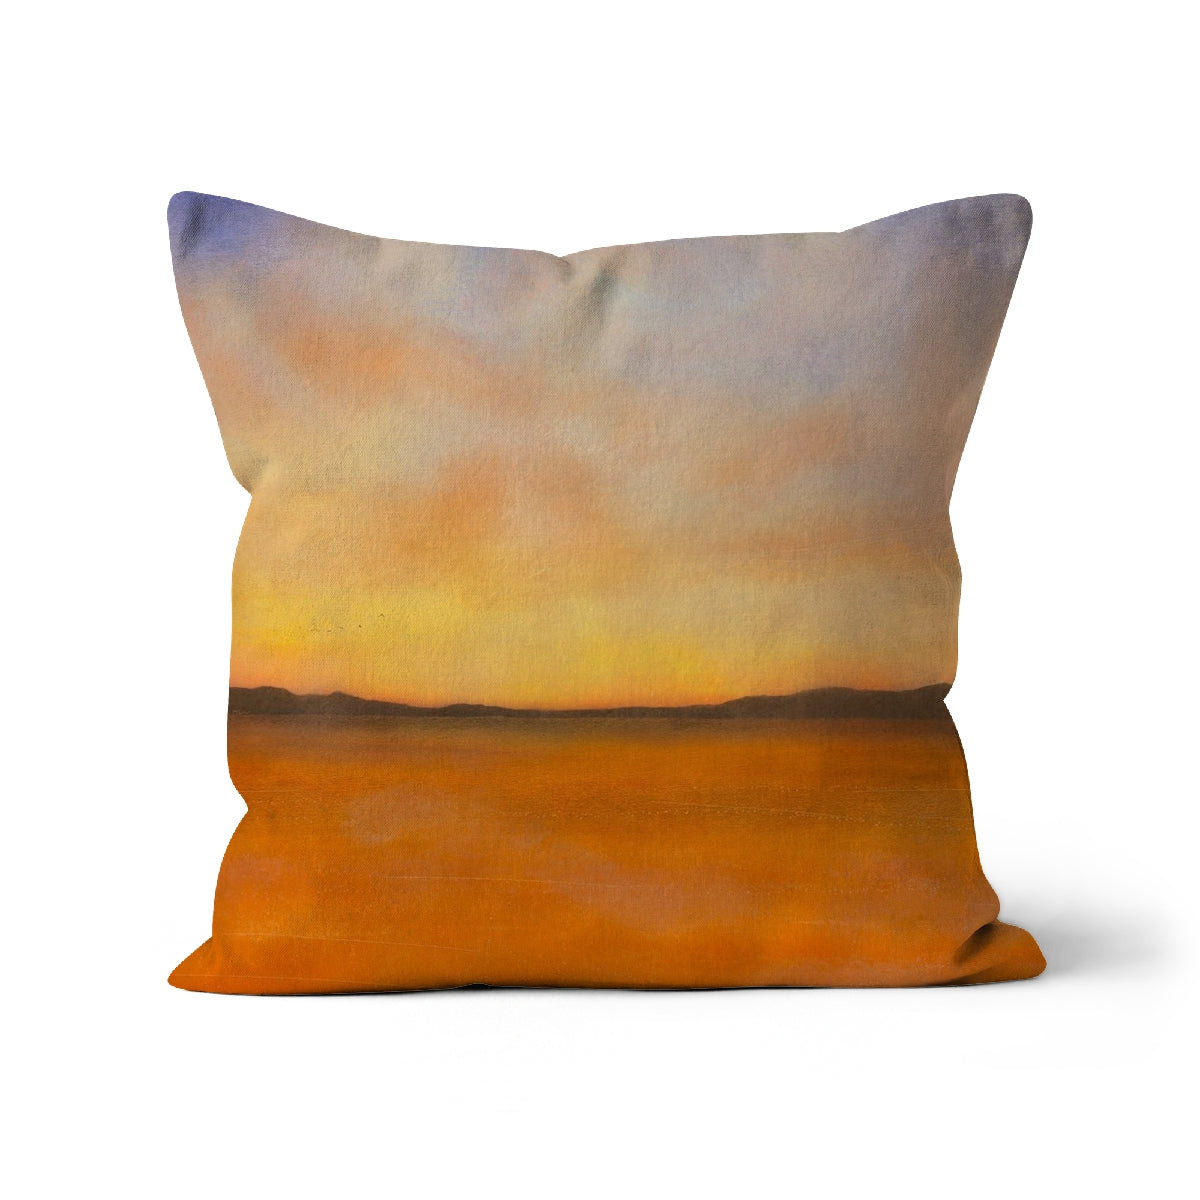 Islay Dawn Art Gifts Cushion-Cushions-Hebridean Islands Art Gallery-Canvas-24"x24"-Paintings, Prints, Homeware, Art Gifts From Scotland By Scottish Artist Kevin Hunter